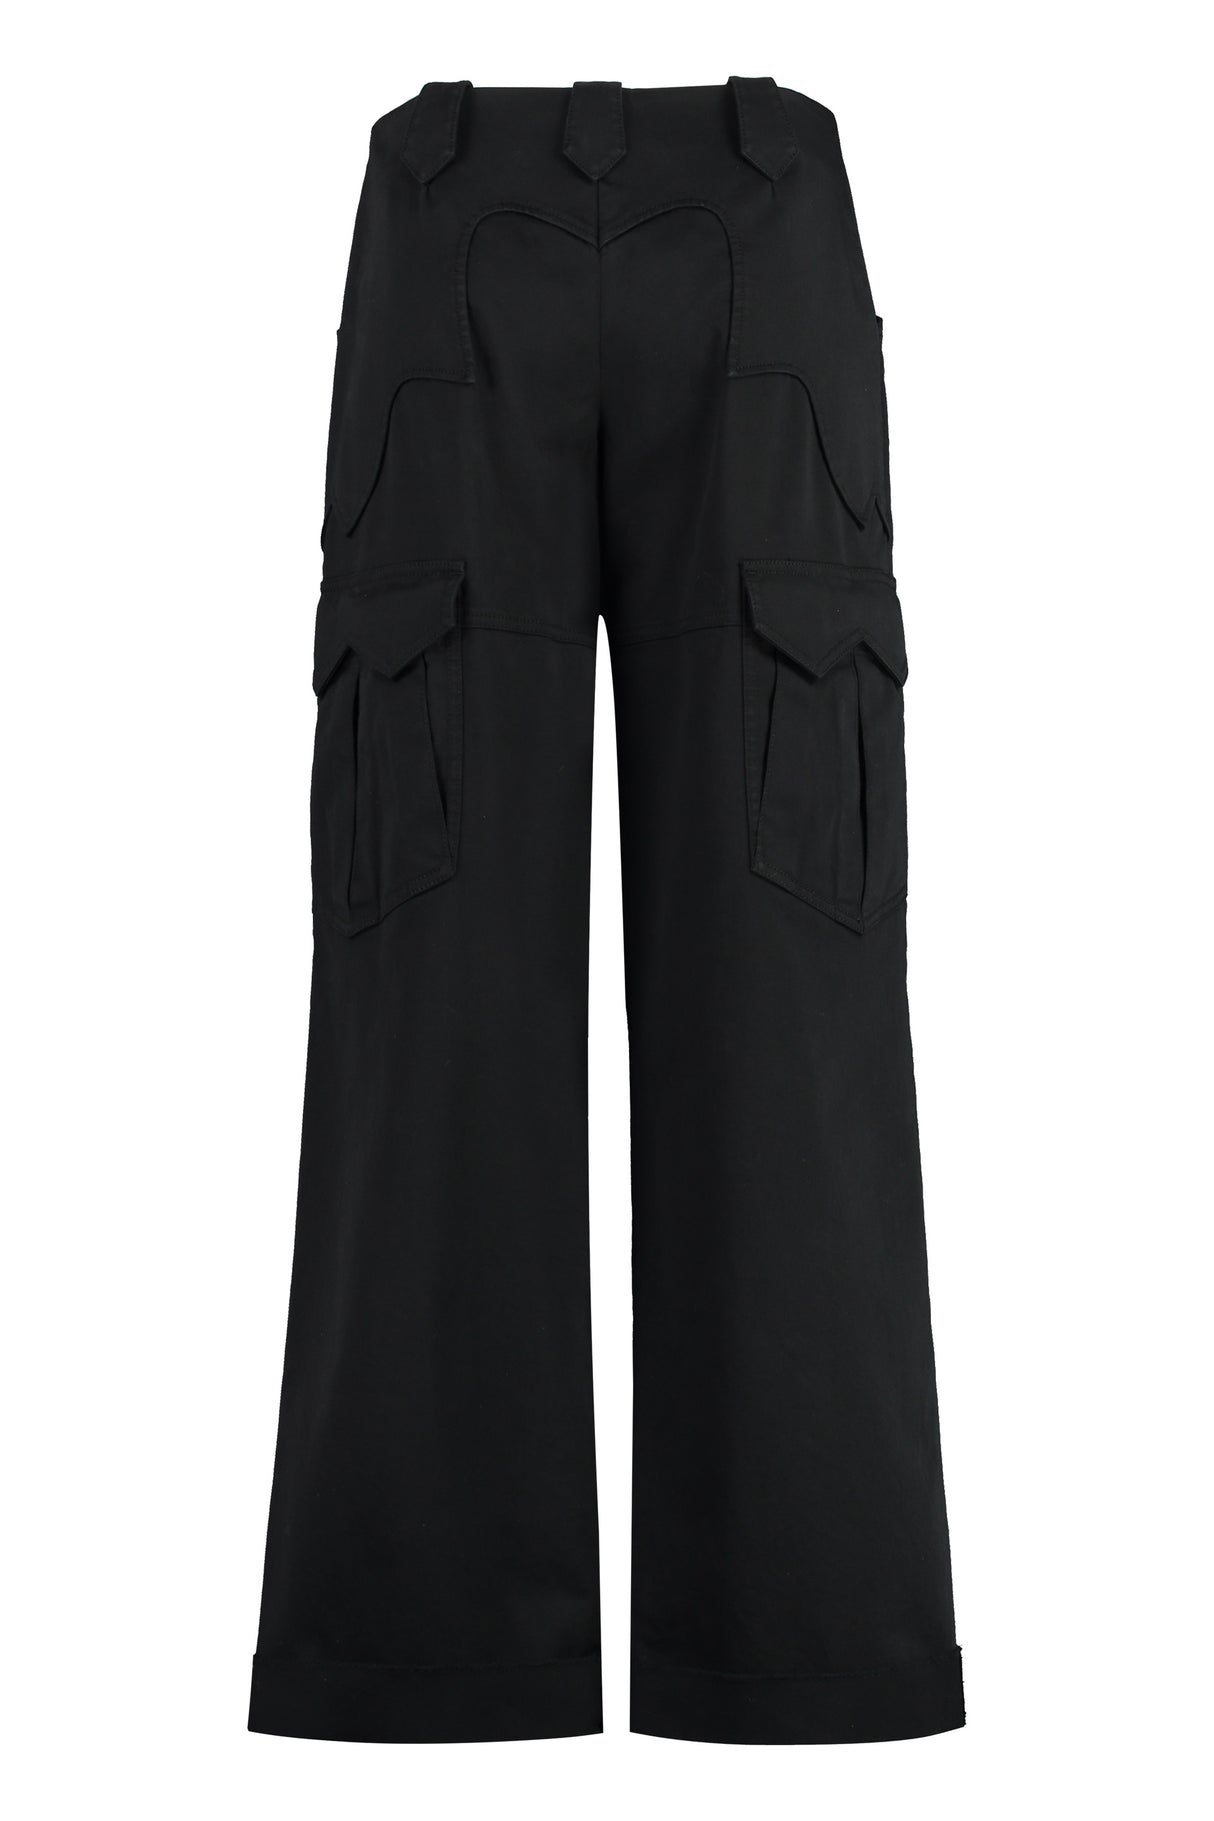 TOM FORD Black Cargo Trousers with Decorative Stitches and Rolled-Up Ankle Cuff